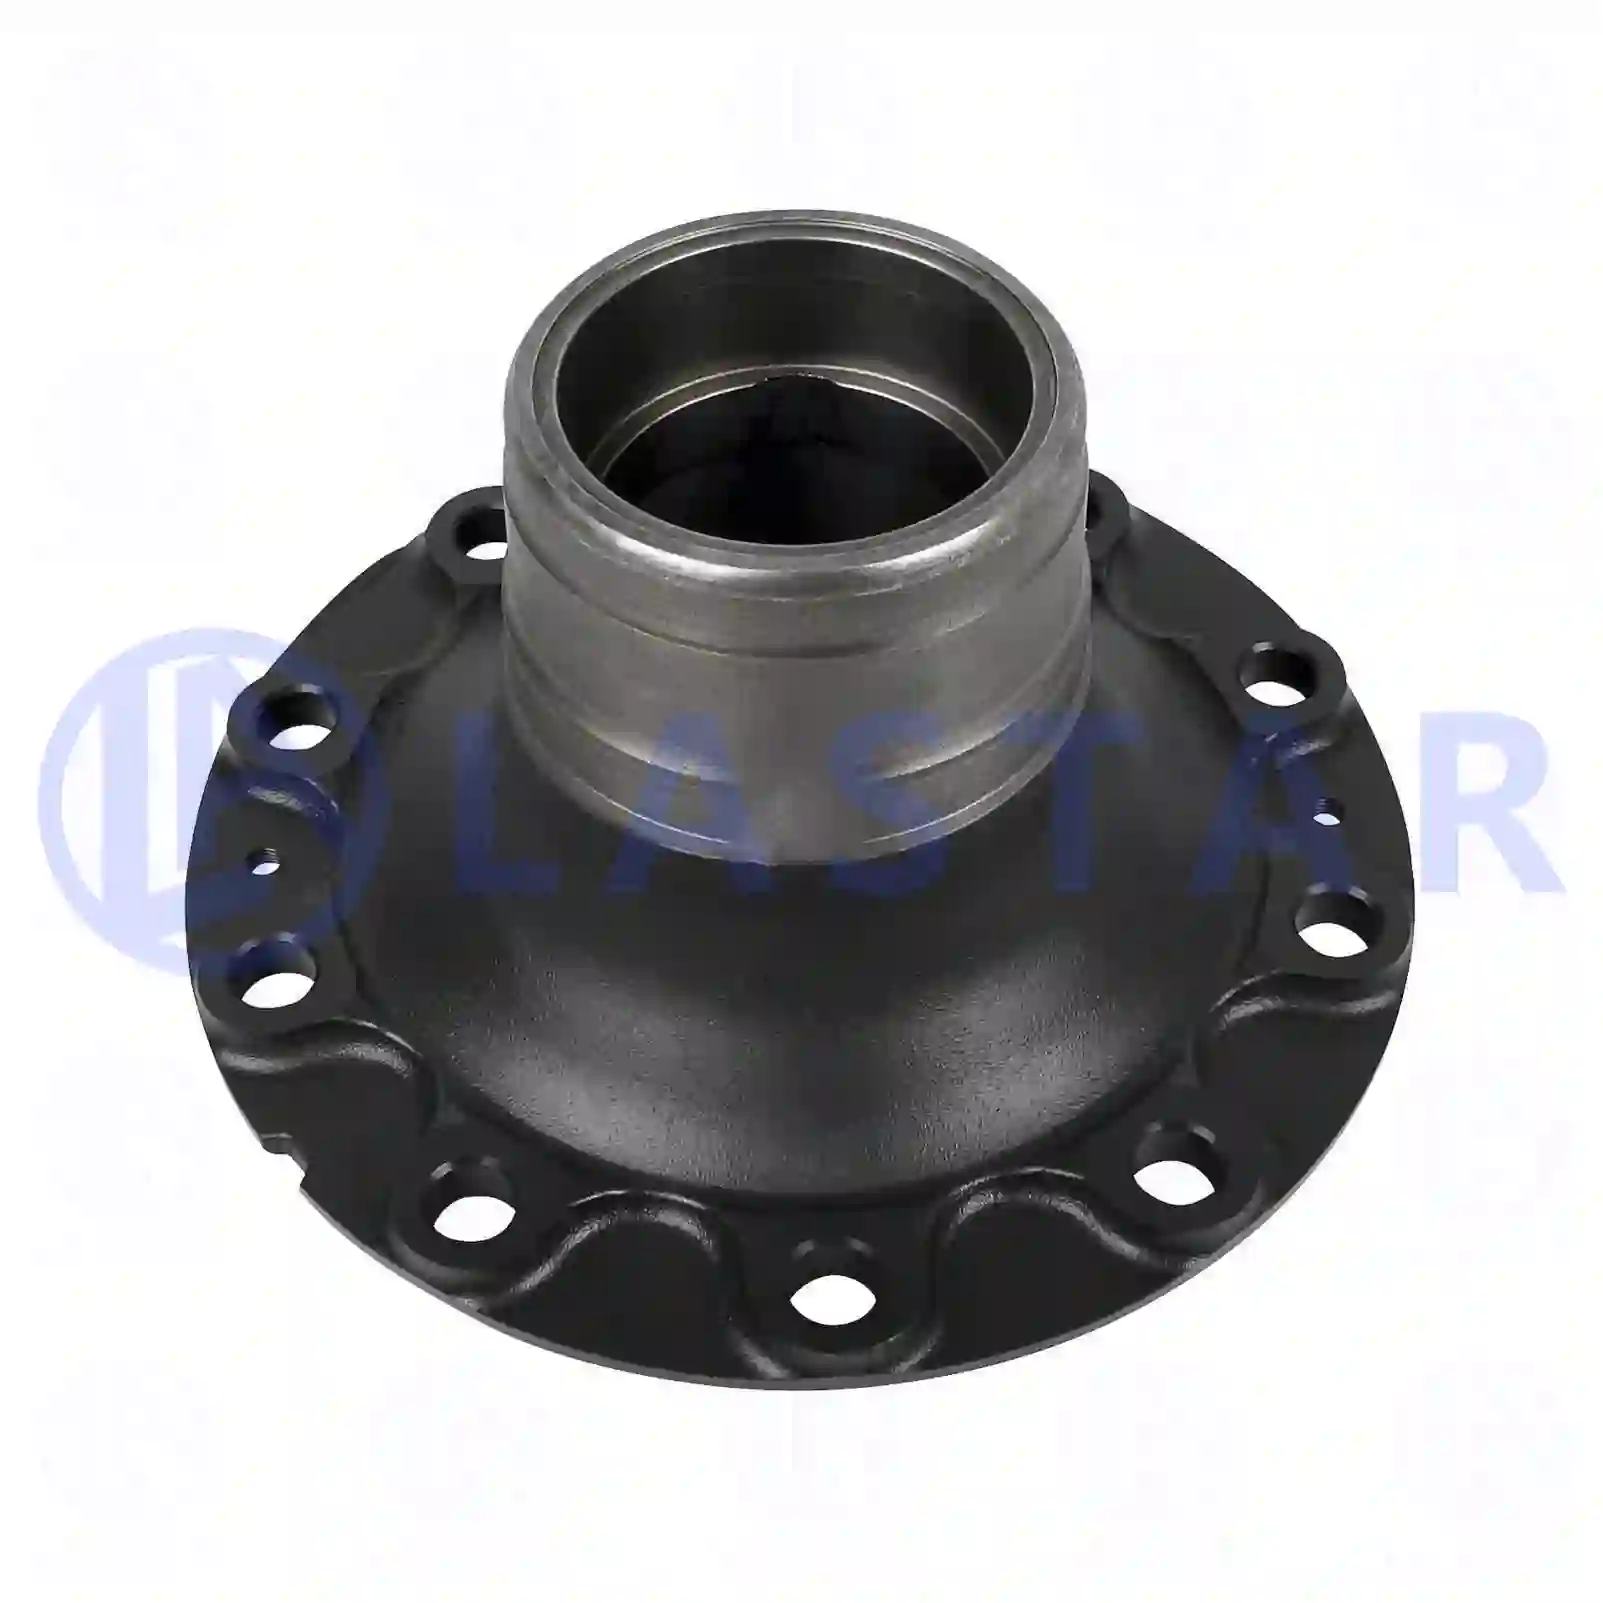 Wheel hub, without bearings, 77726593, 7420534904, 7421024160, 20534904, 20581399, 21024160, 21024166 ||  77726593 Lastar Spare Part | Truck Spare Parts, Auotomotive Spare Parts Wheel hub, without bearings, 77726593, 7420534904, 7421024160, 20534904, 20581399, 21024160, 21024166 ||  77726593 Lastar Spare Part | Truck Spare Parts, Auotomotive Spare Parts